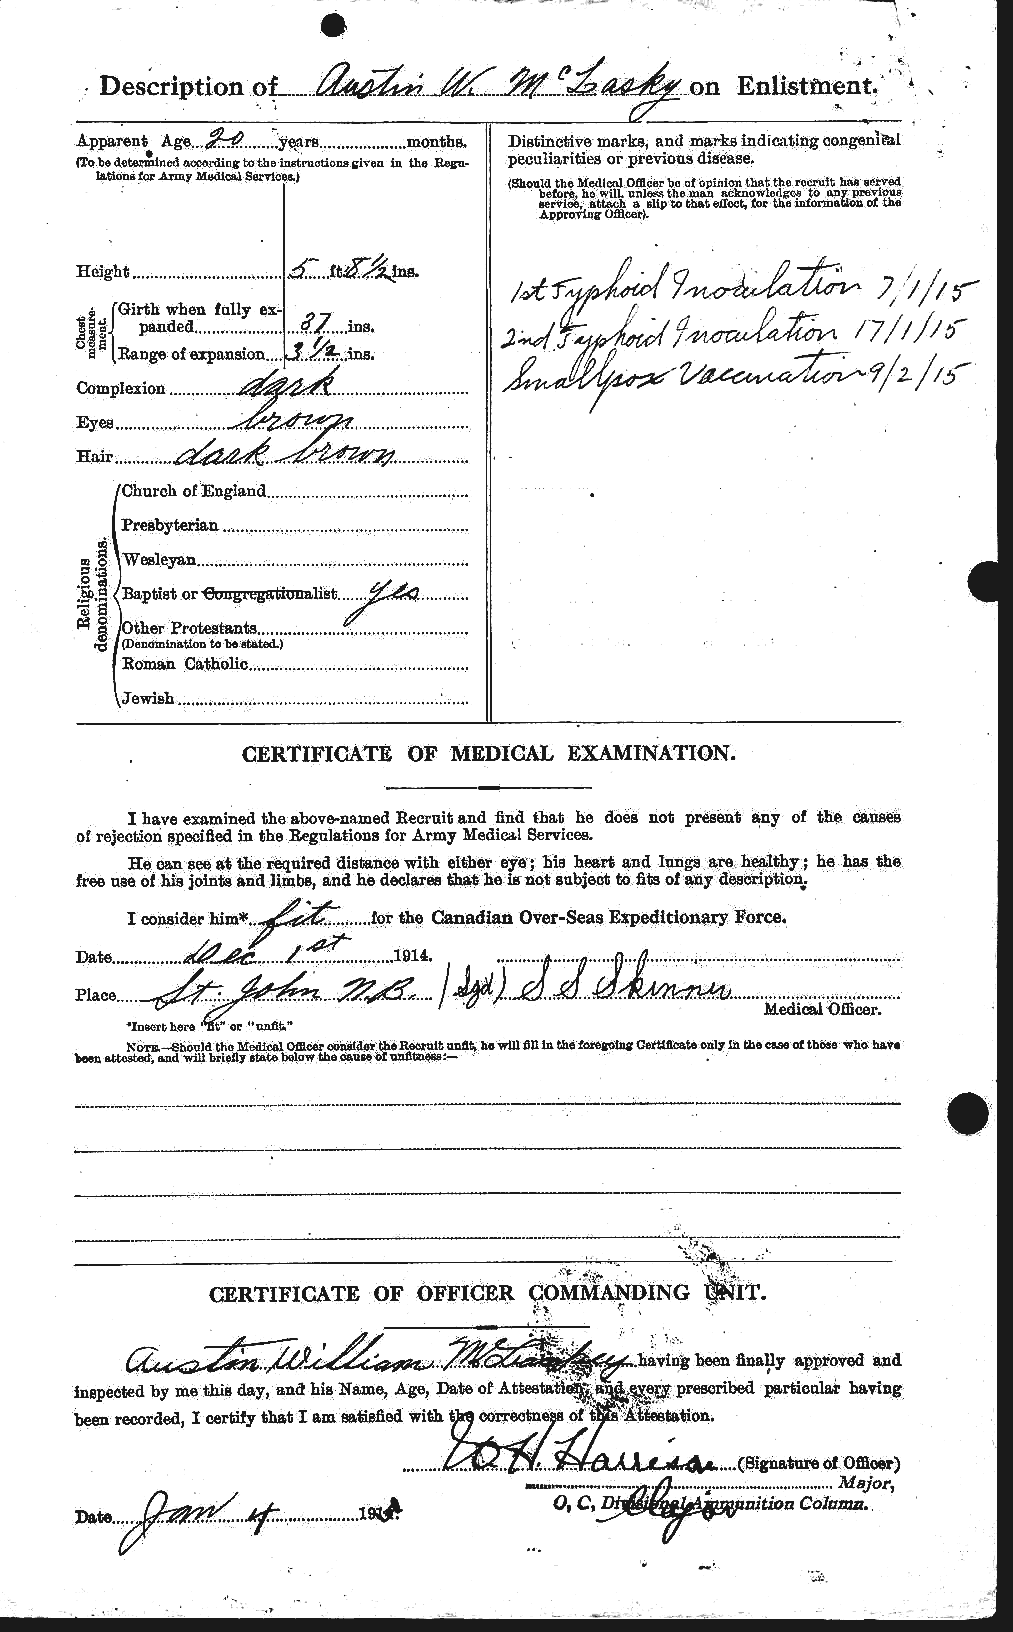 Personnel Records of the First World War - CEF 536070b